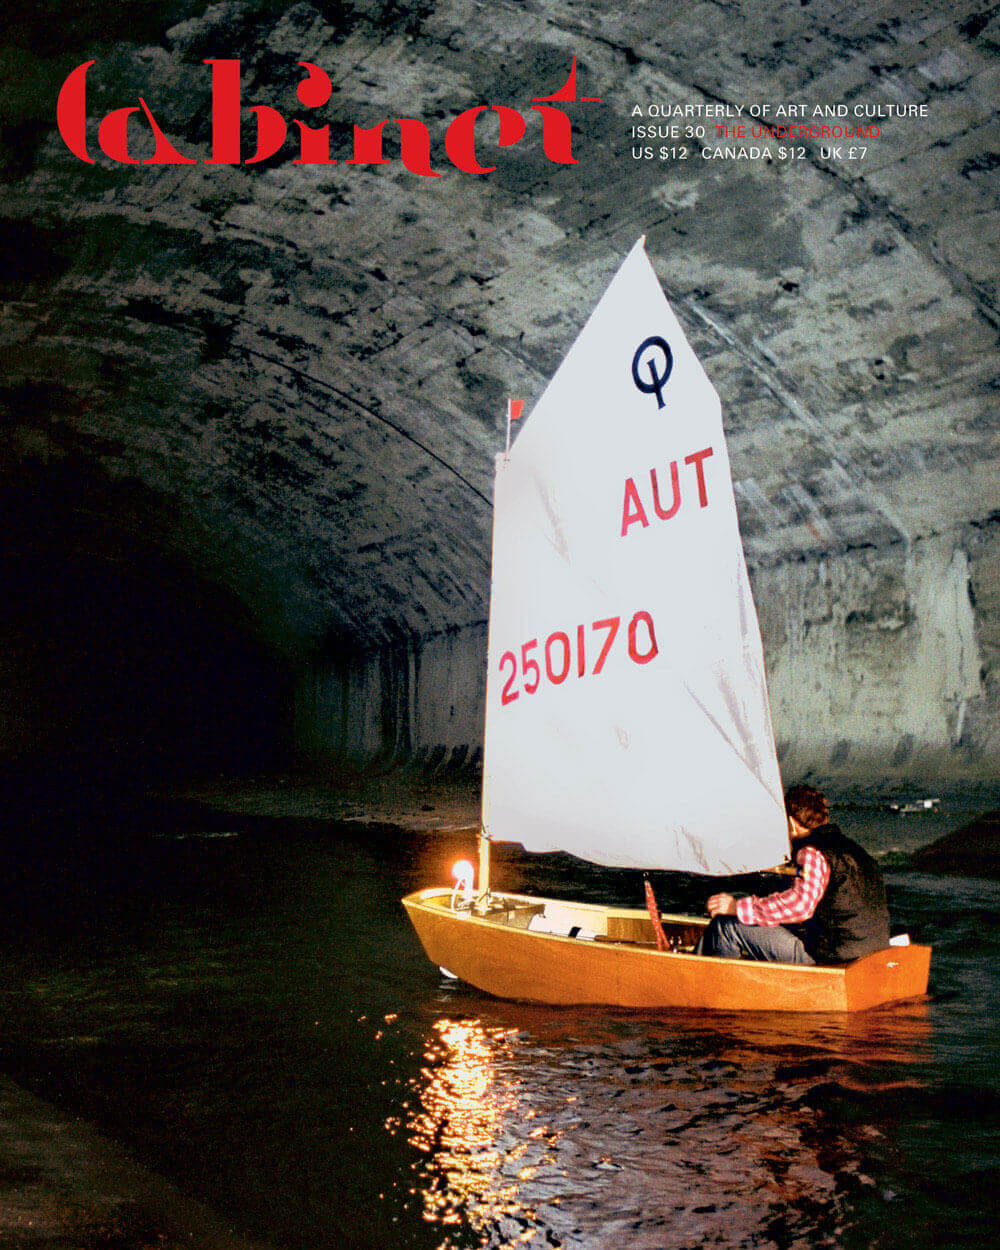 Still from artist Hans Schabus’s 2002 video Western. Depicted is a man in a small sailboat with raised sails drifting through a tunnel in Vienna’s sewer system. 